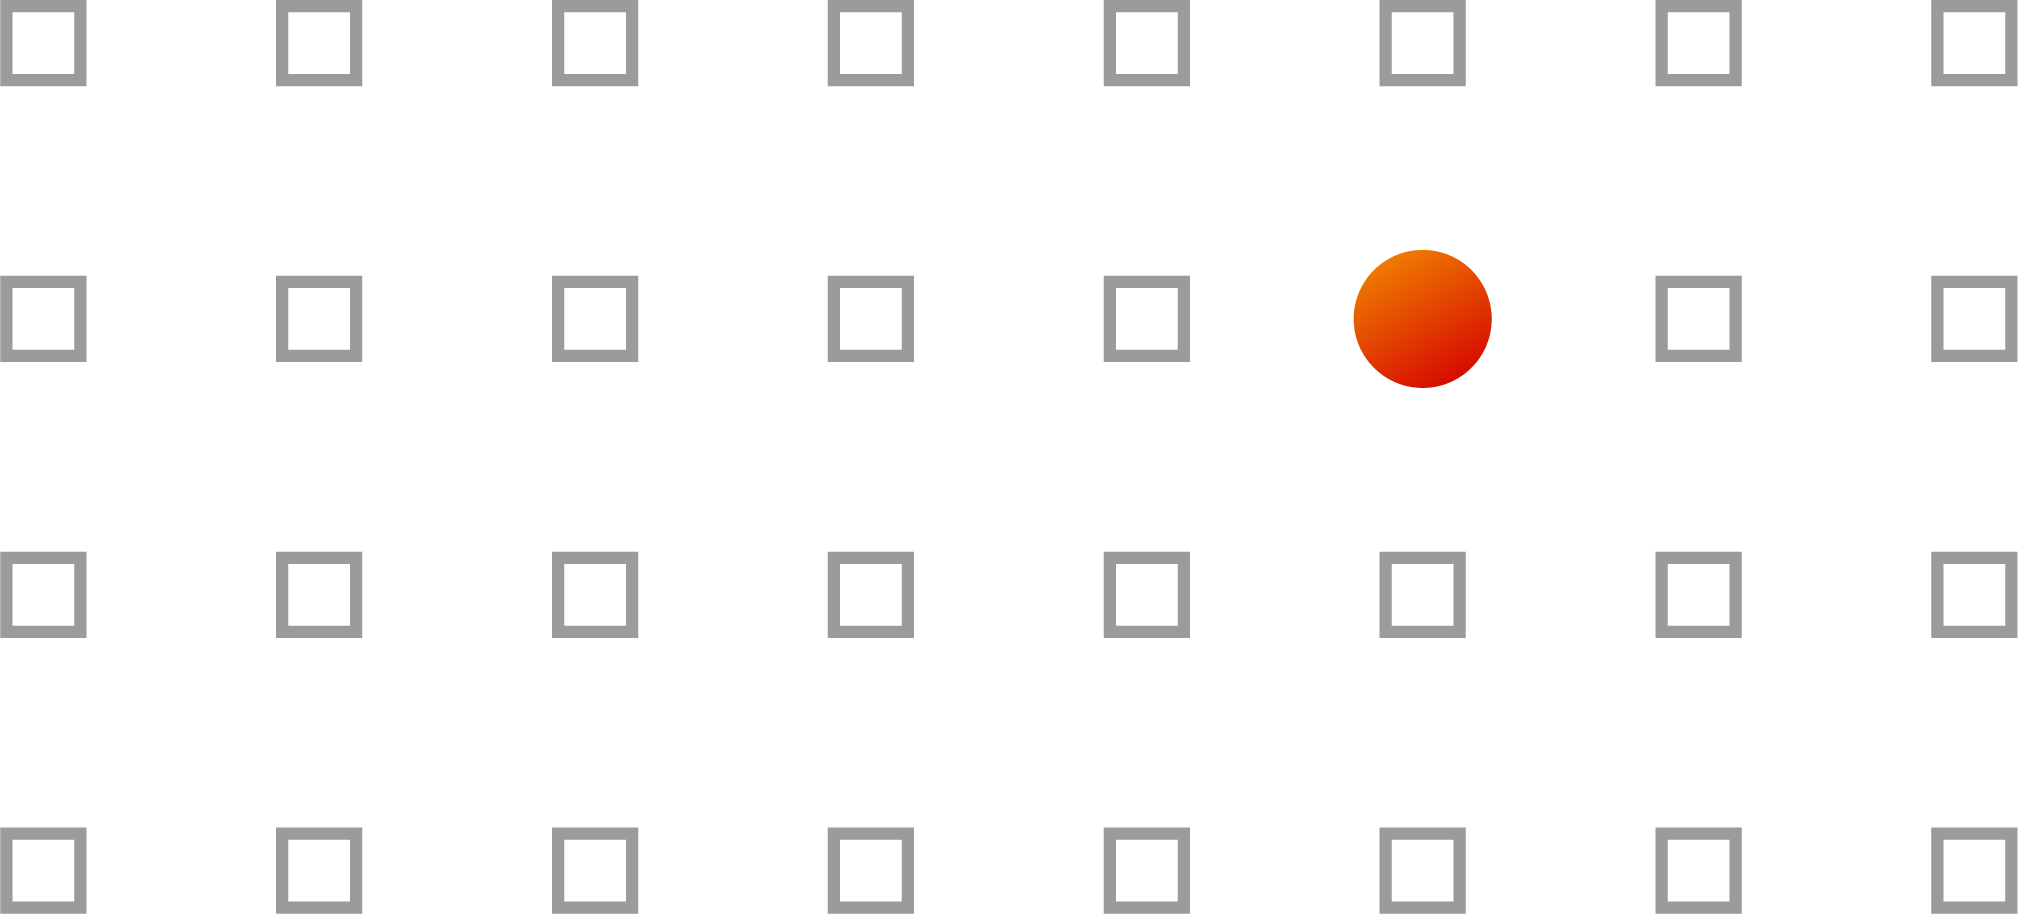 The Von Restorff Effect shown with several grey squares and a single orange circle. 